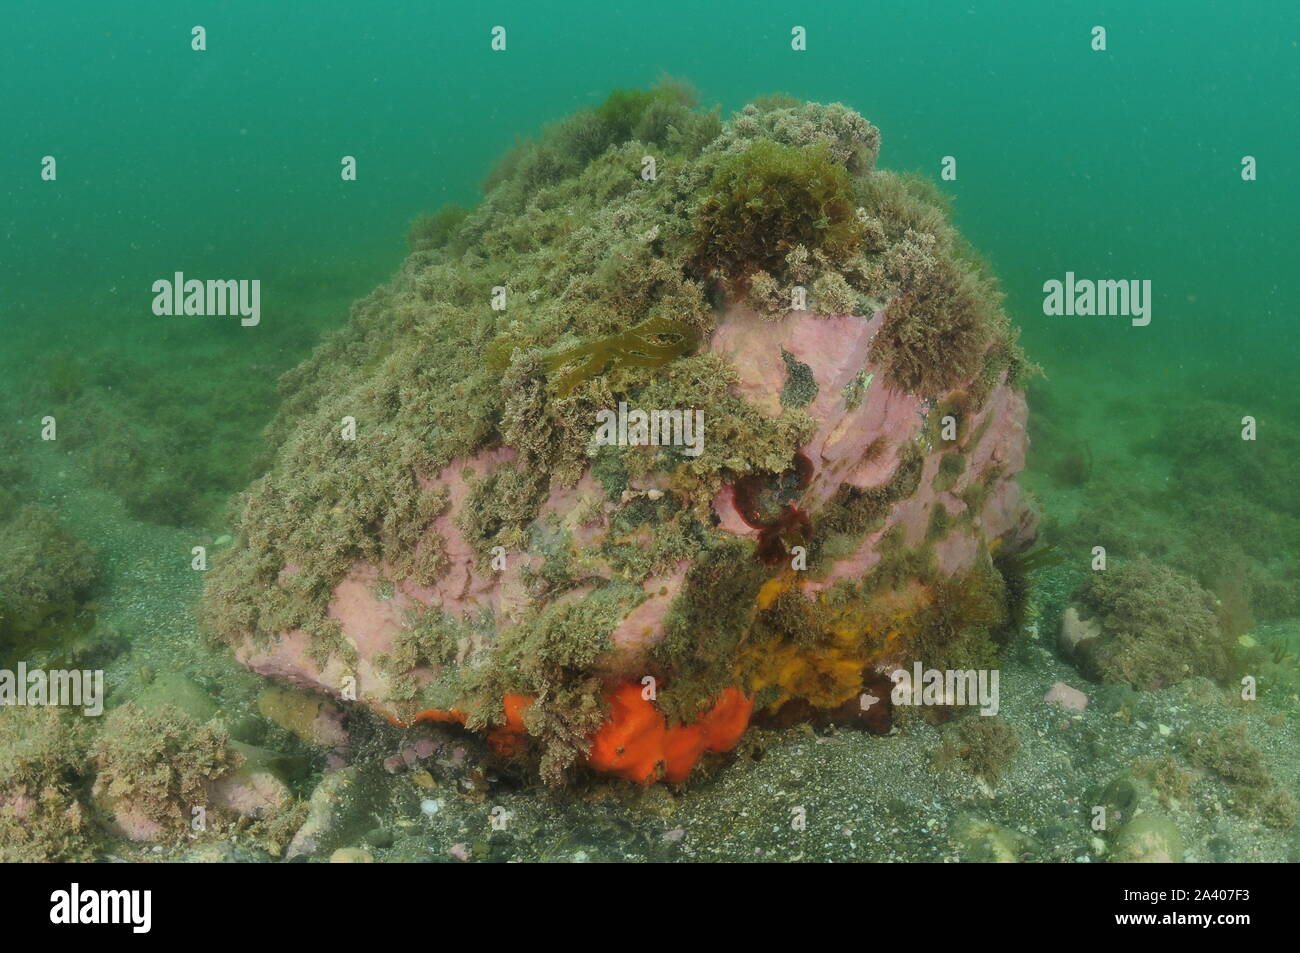 Rock with colorful sponges and growth of short algae on flat bottom. Stock Photo